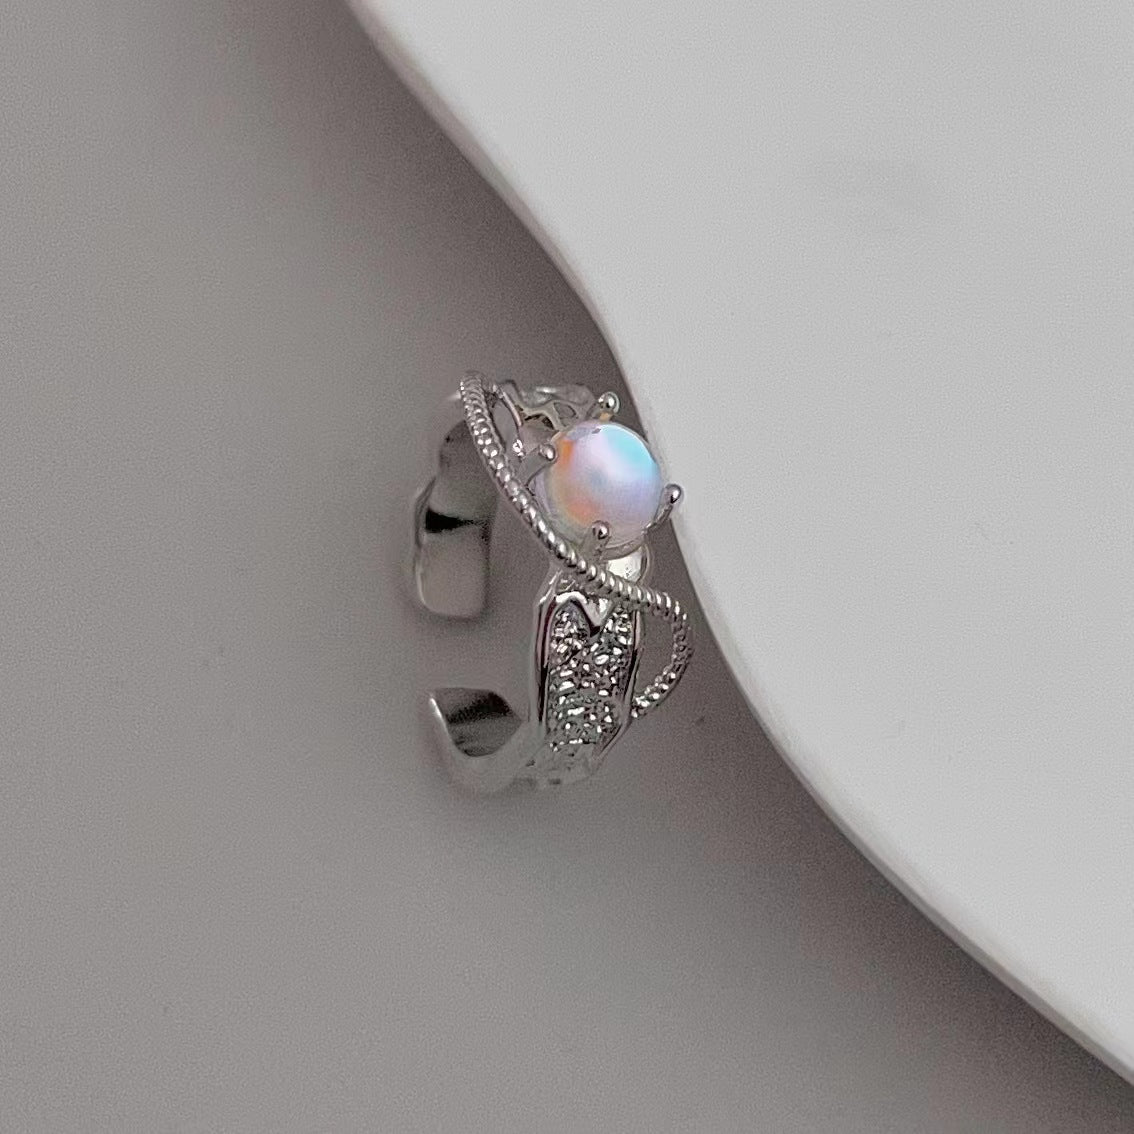 Homemade Moonlight Stone series niche design ring with adjustable opening and diamond inlay design feel ring